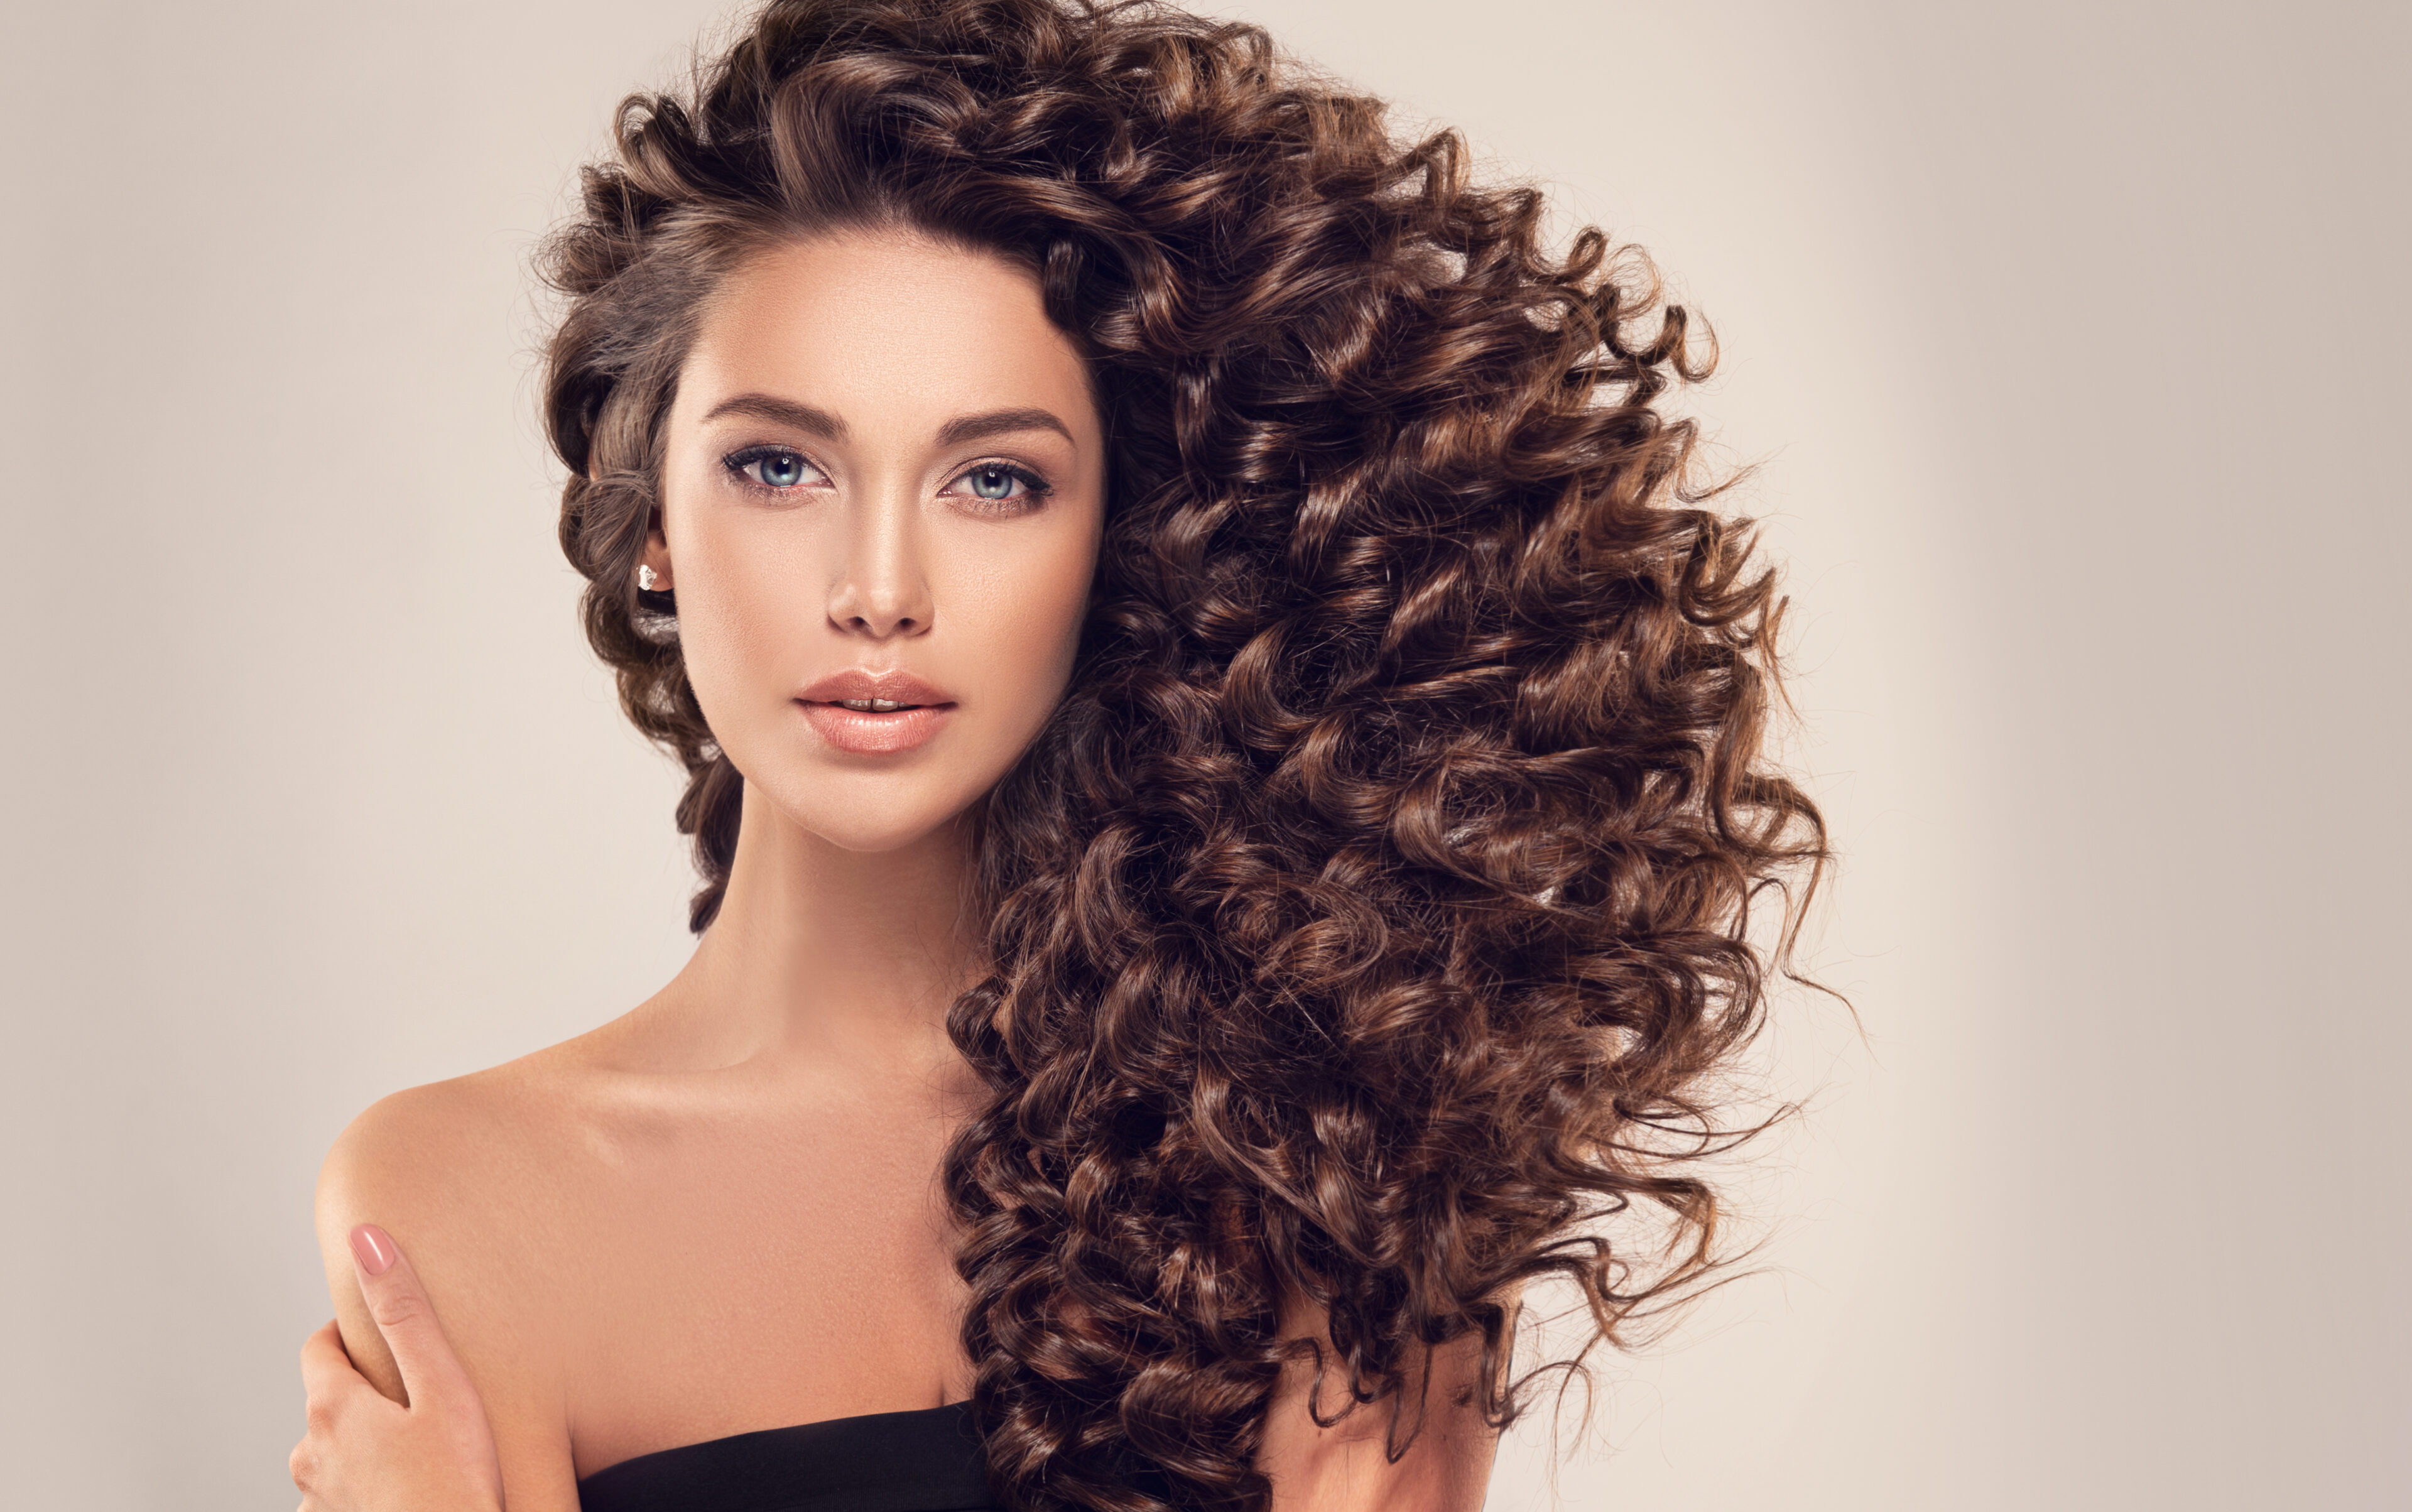 Brunette girl with long and shiny curly hair